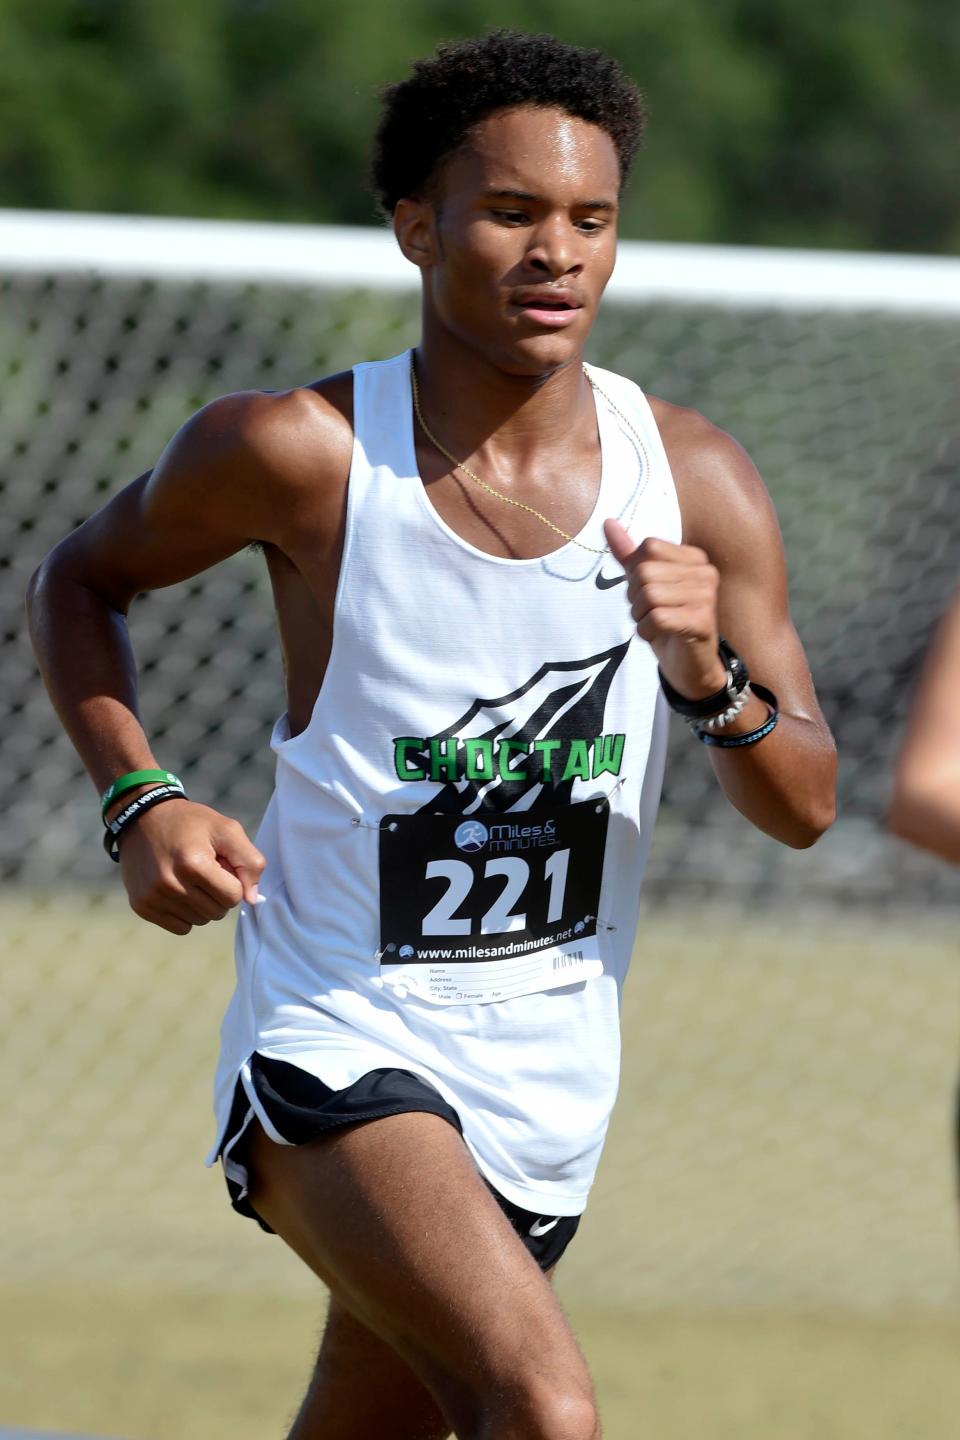 Choctawhatchee High School's Kaleb Hollins took first place in the boys varsity division of the Okaloosa County Cross Country Championships held Thursday, Oct. 13, 2022 at the Howard Hill Soccer Complex in Niceville.